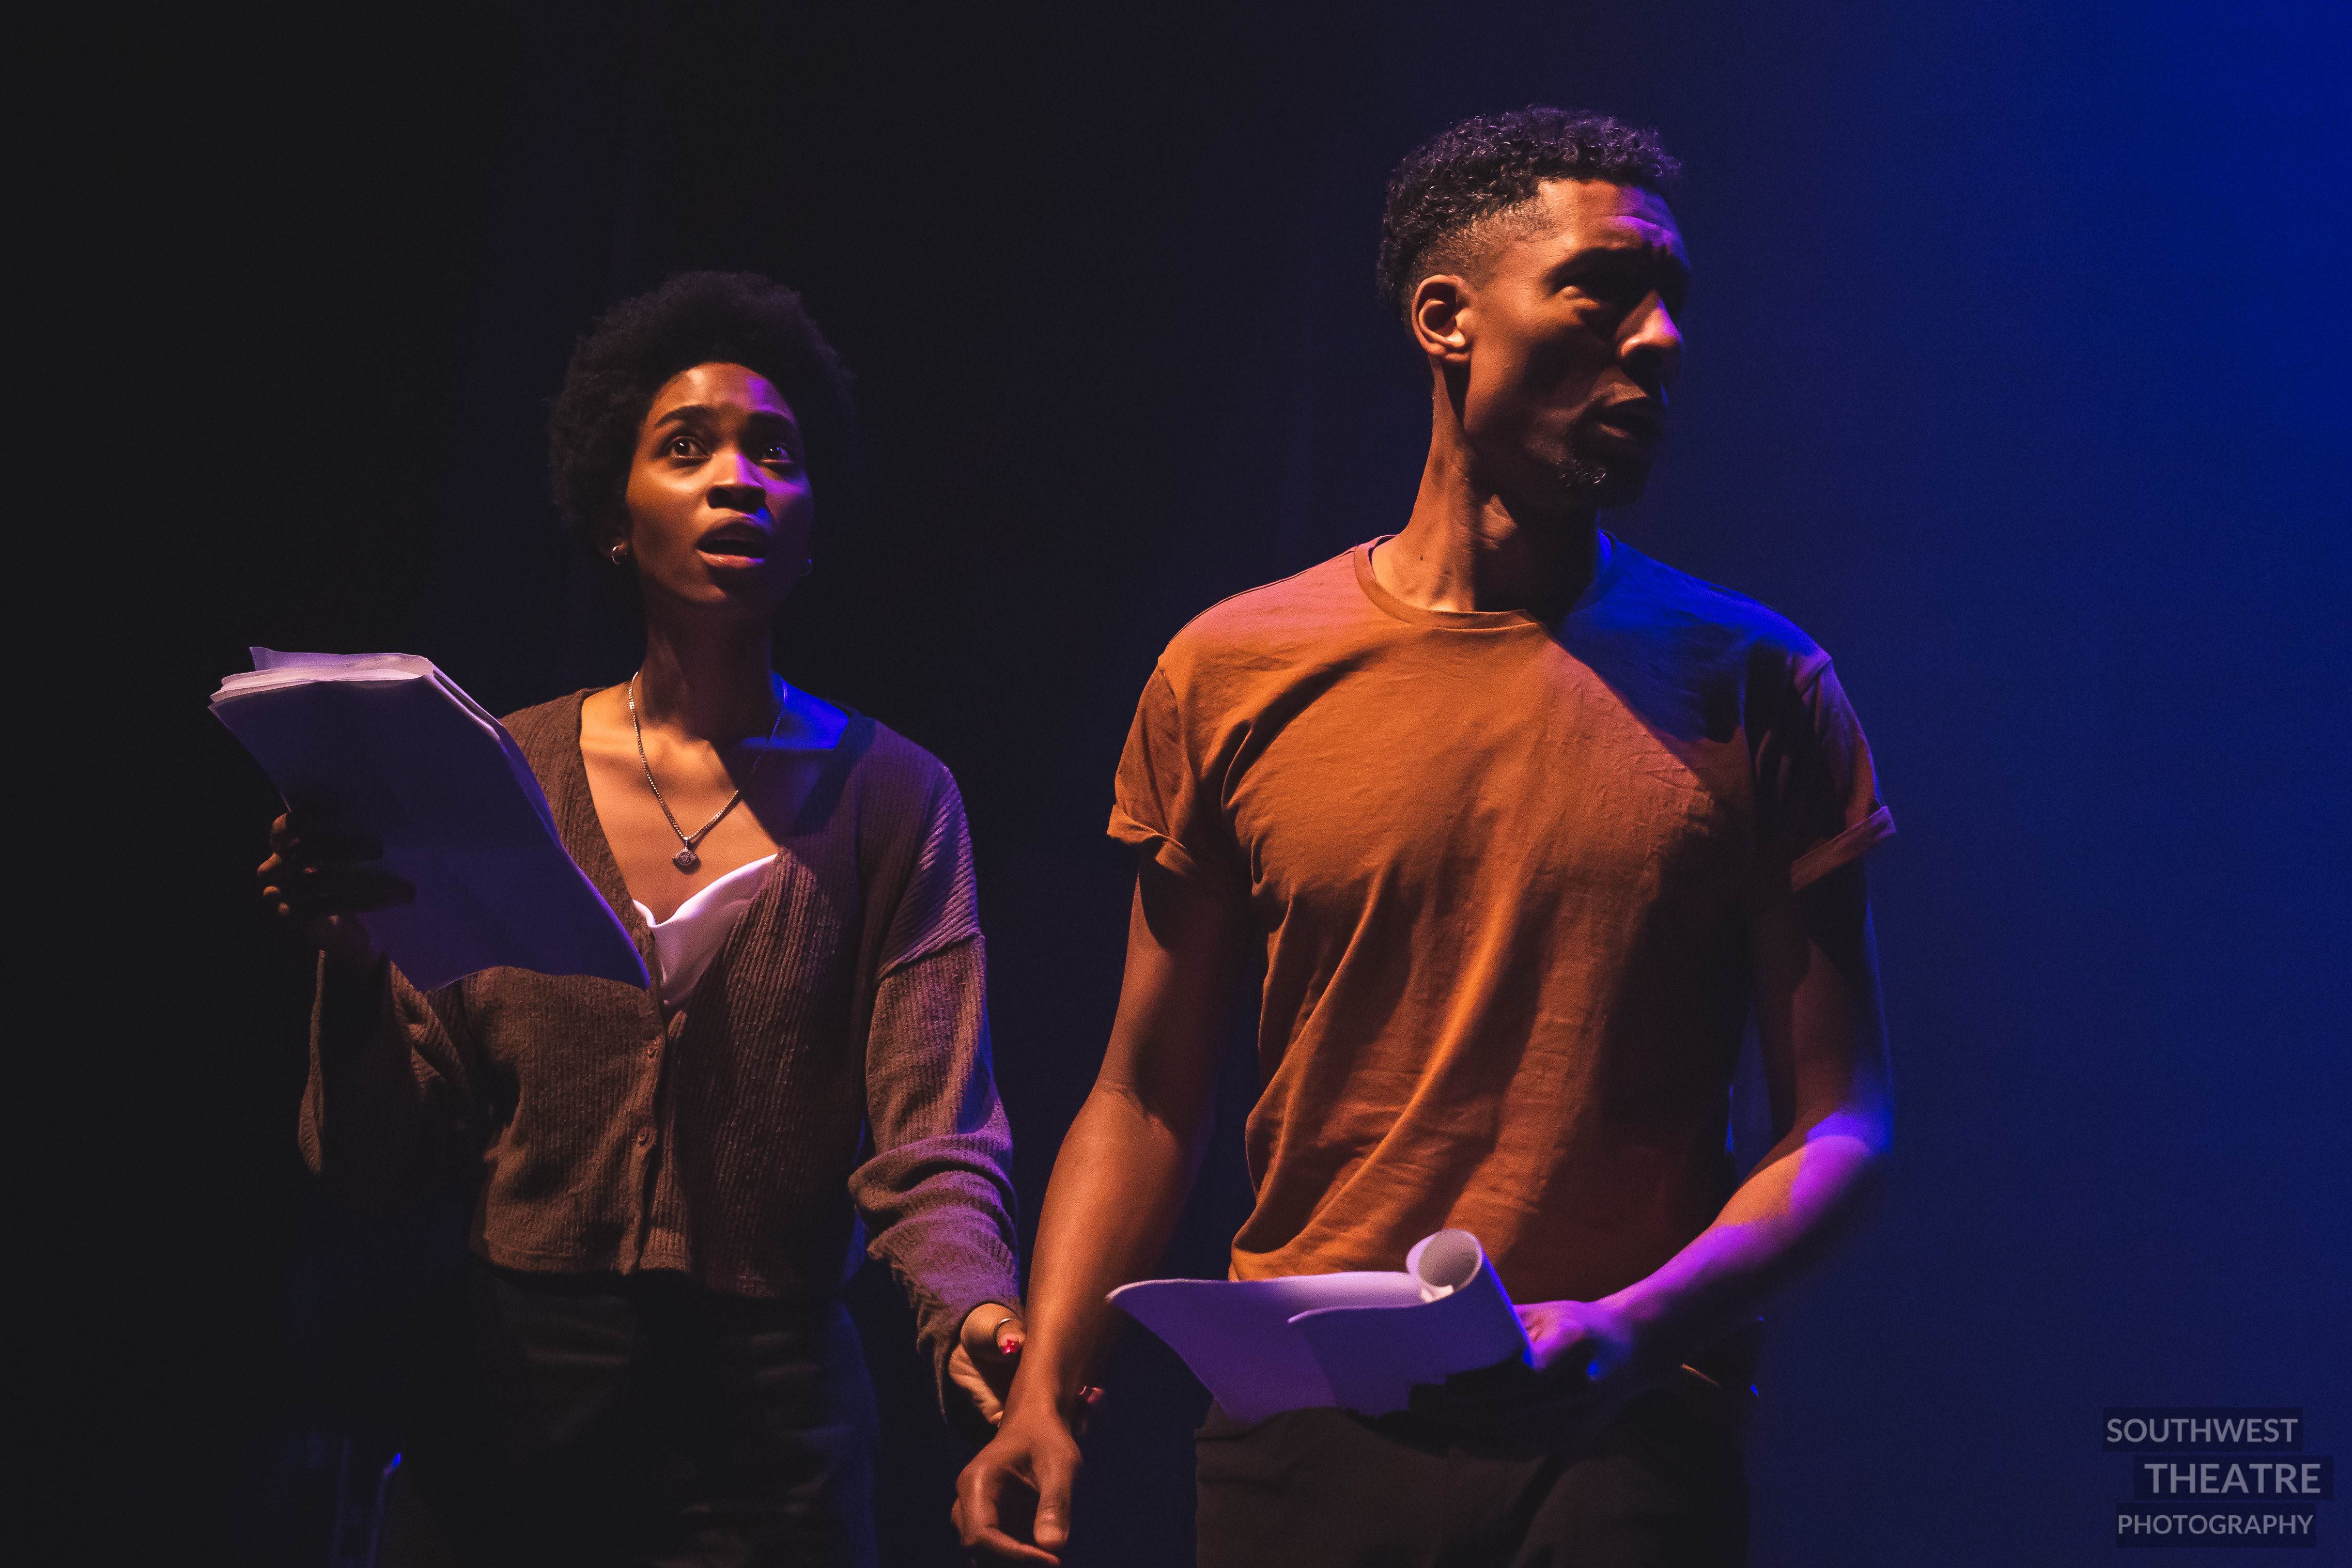 N’Dea, playing a centipede, and Emile, playing Moth B, are standing close together on stage. N’Dea is looking upwards and Emile is looking away. N’Dea is holding Emile’s wrist.